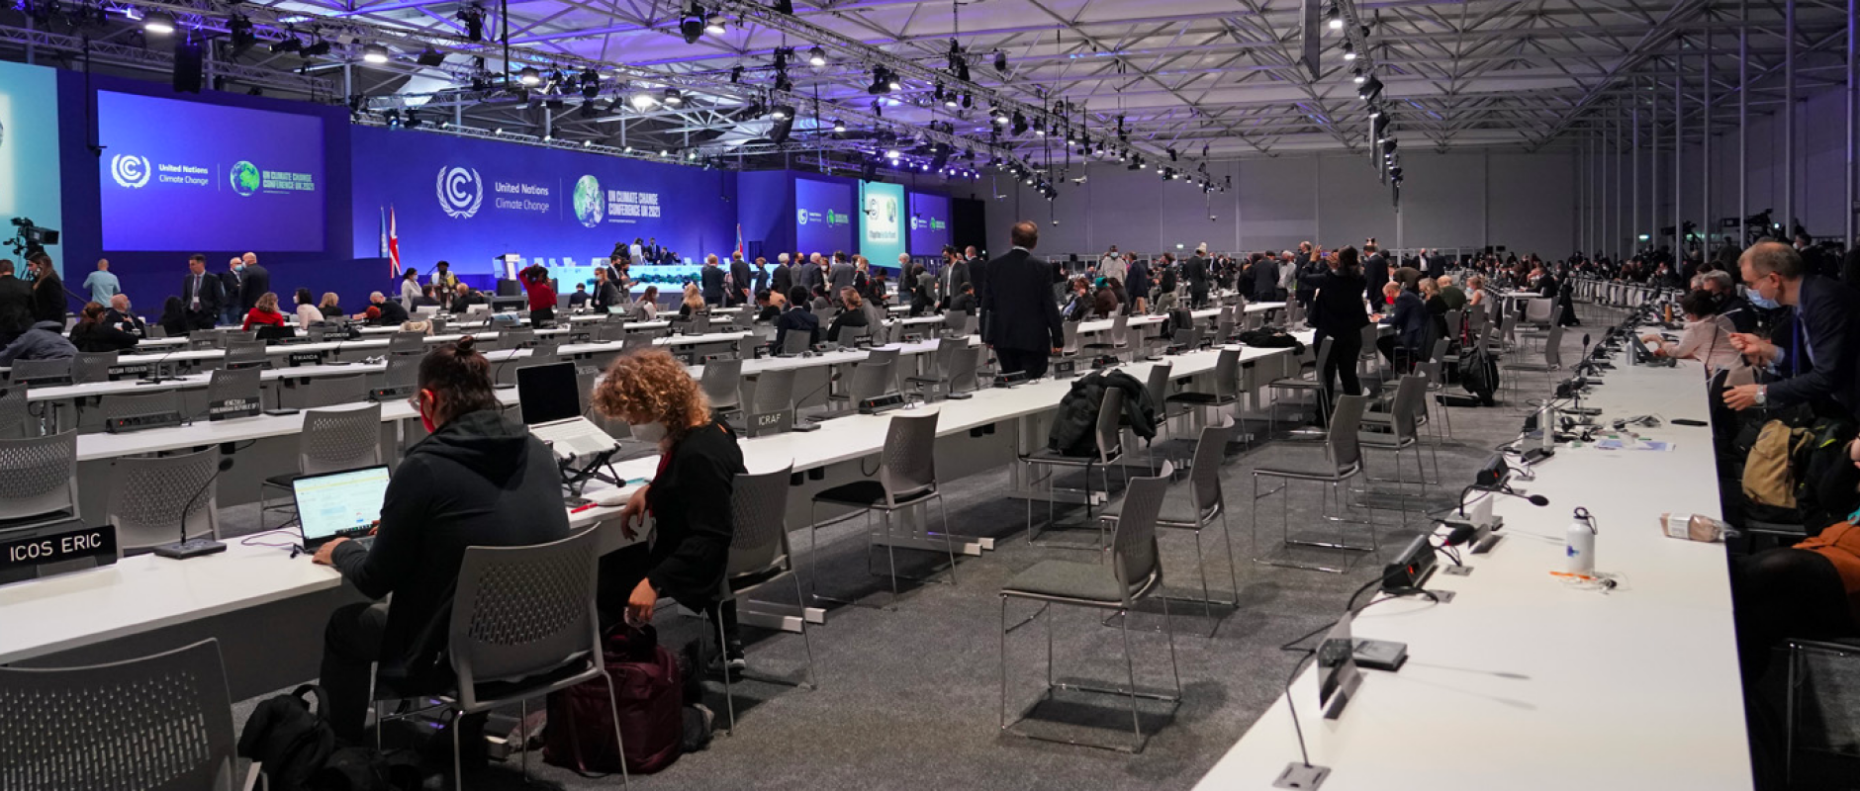 People sitting at desks in front of podium with blue screen at un climate talks in Glasgow 2021